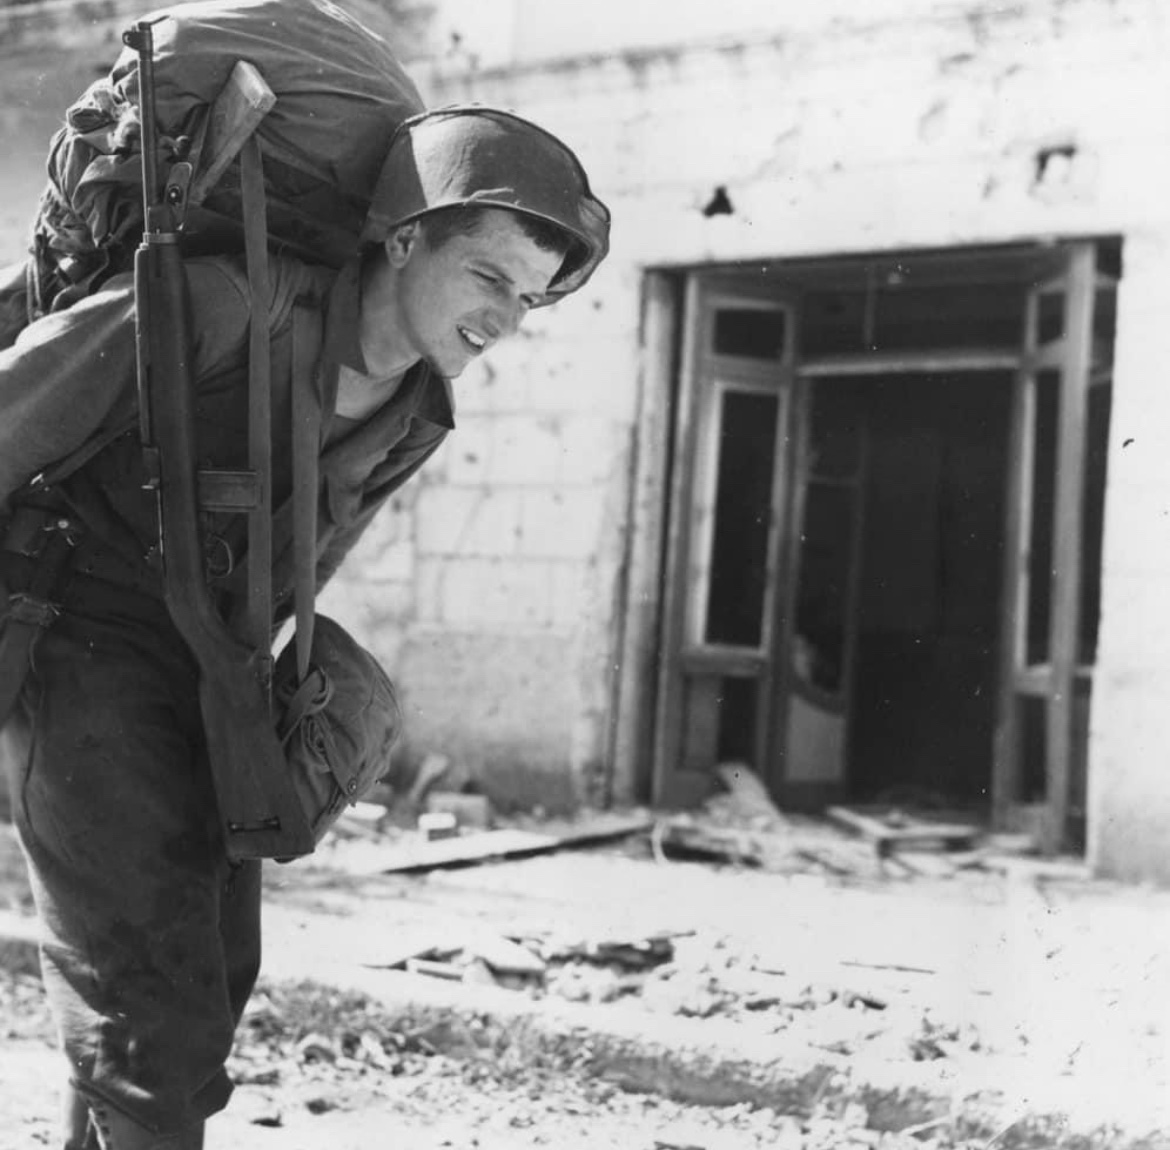 In May of 1945, Pvt. Joseph Zbin of the 85th Infantry Division Carrie’s a 90 pound load of mortar ammo through the town of Scauri, Italy. 🪖